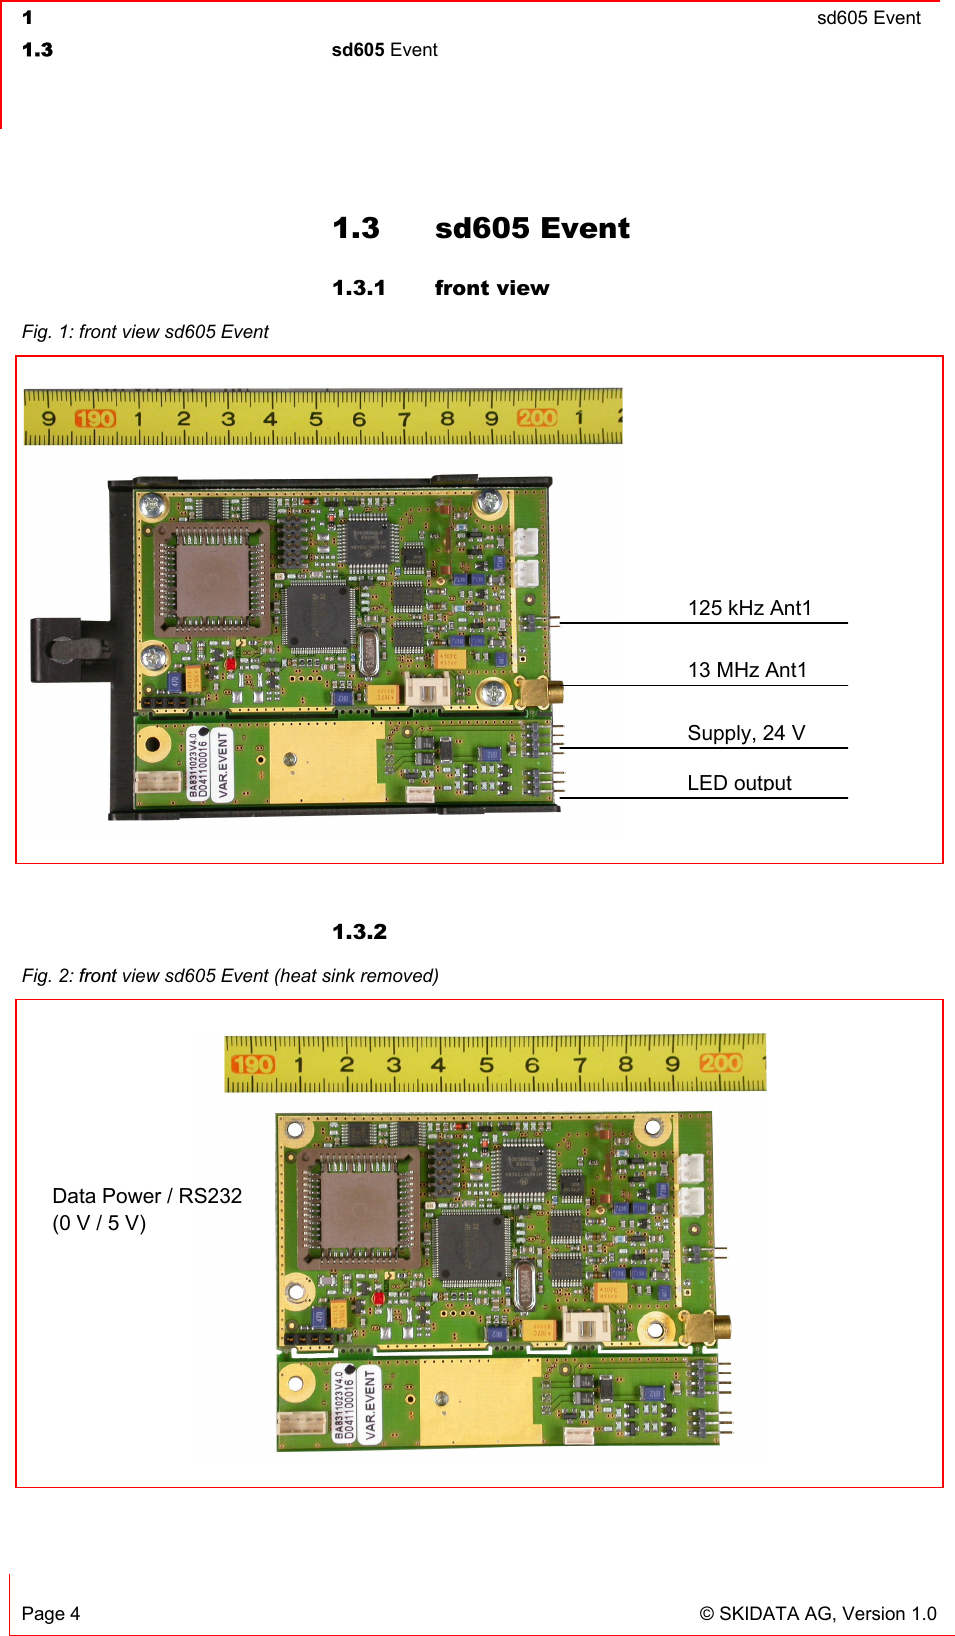  1  sd605 Event  1.3 sd605 Event   Page 4  © SKIDATA AG, Version 1.0 1.3 sd605 Event 1.3.1 front view  1.3.2   Fig. 1: front view sd605 Event   Fig. 2: front view sd605 Event (heat sink removed)   125 kHz Ant113 MHz Ant1Supply, 24 V LED outputData Power / RS232 (0 V / 5 V) 